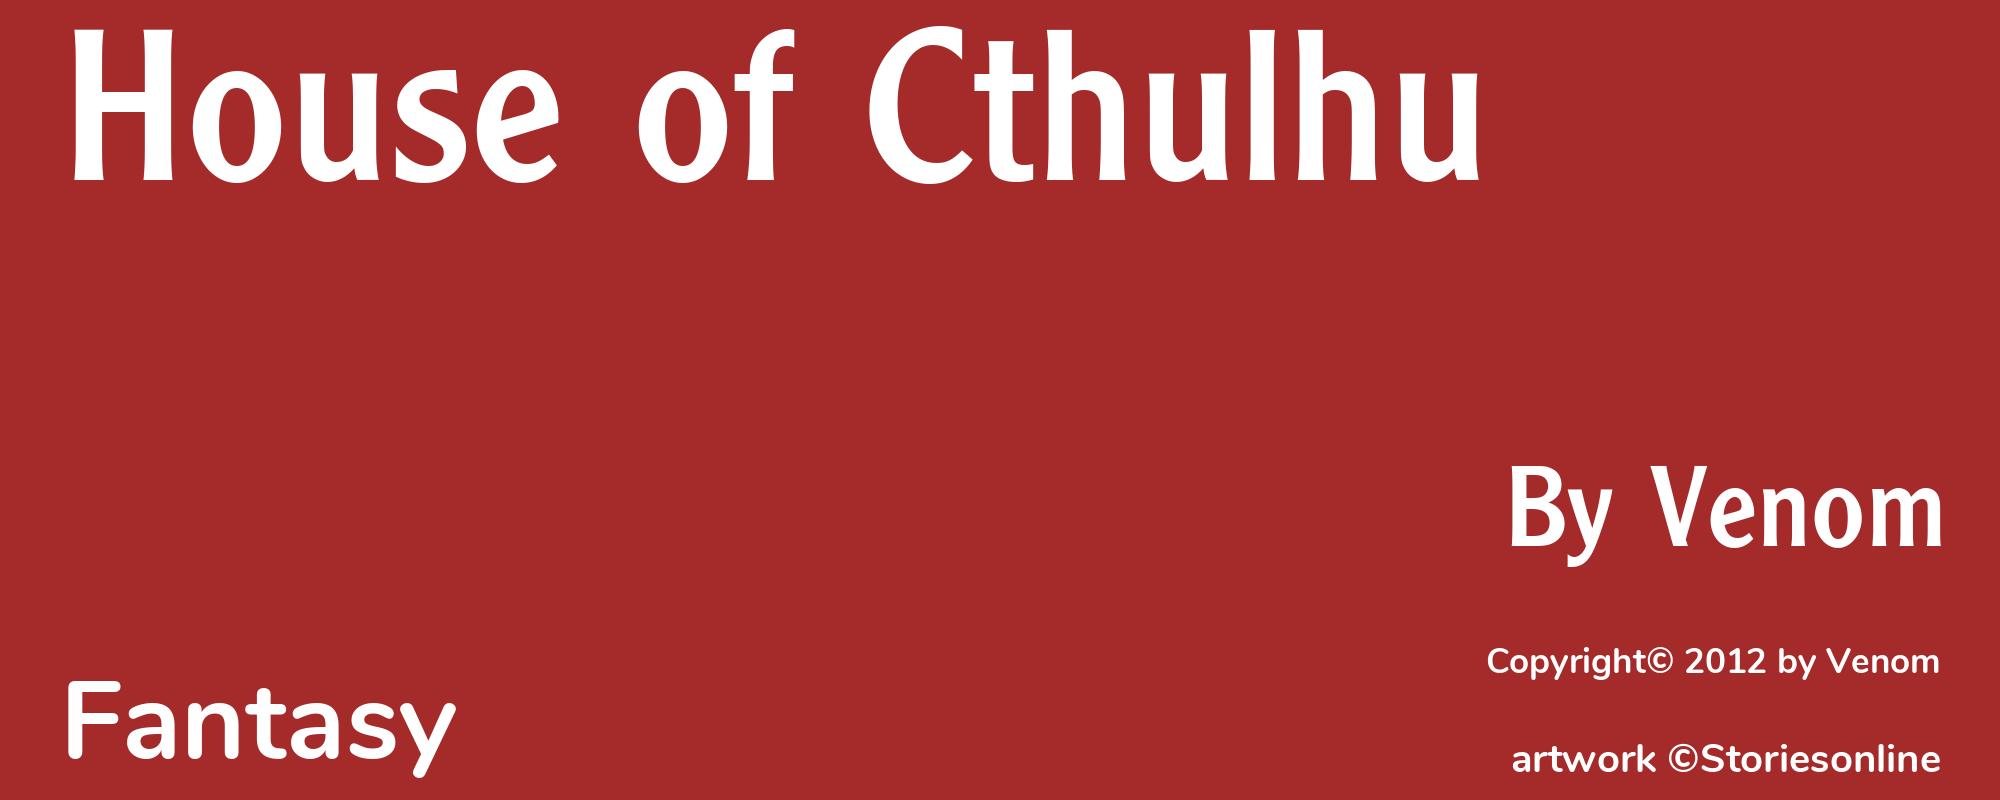 House of Cthulhu - Cover